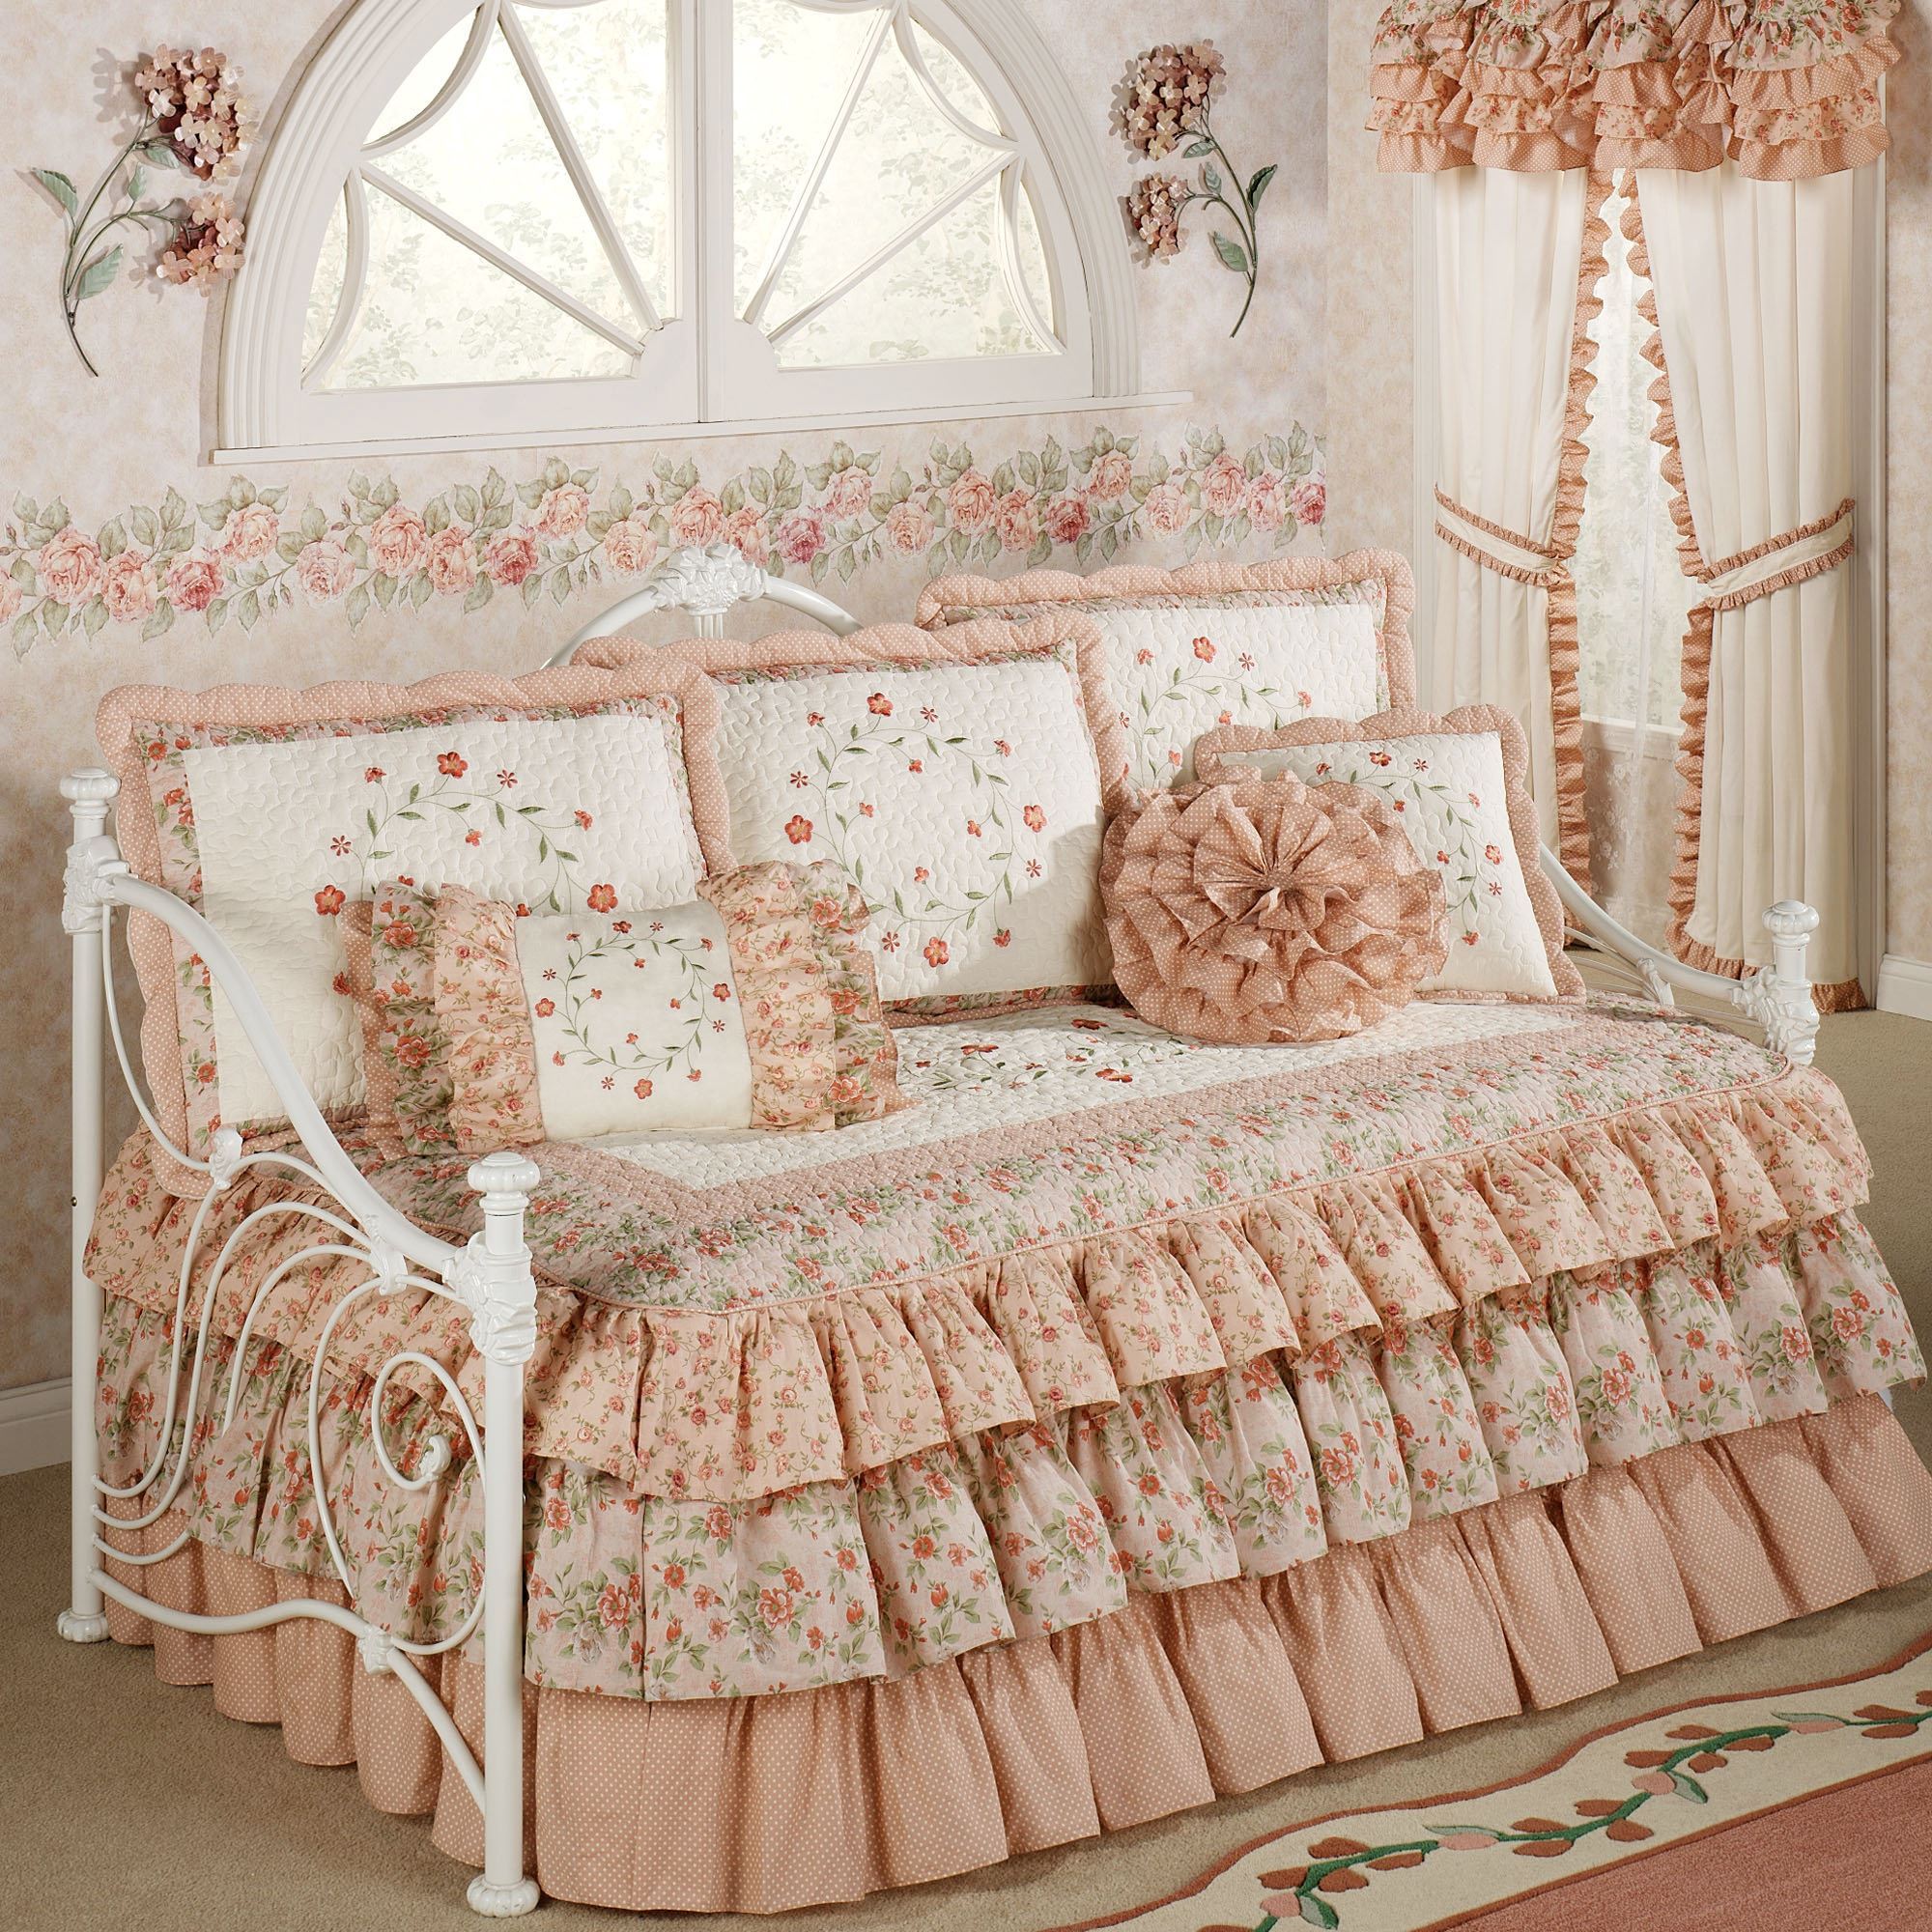 Daybed bedding sets clearance - 20 attributions to the ...